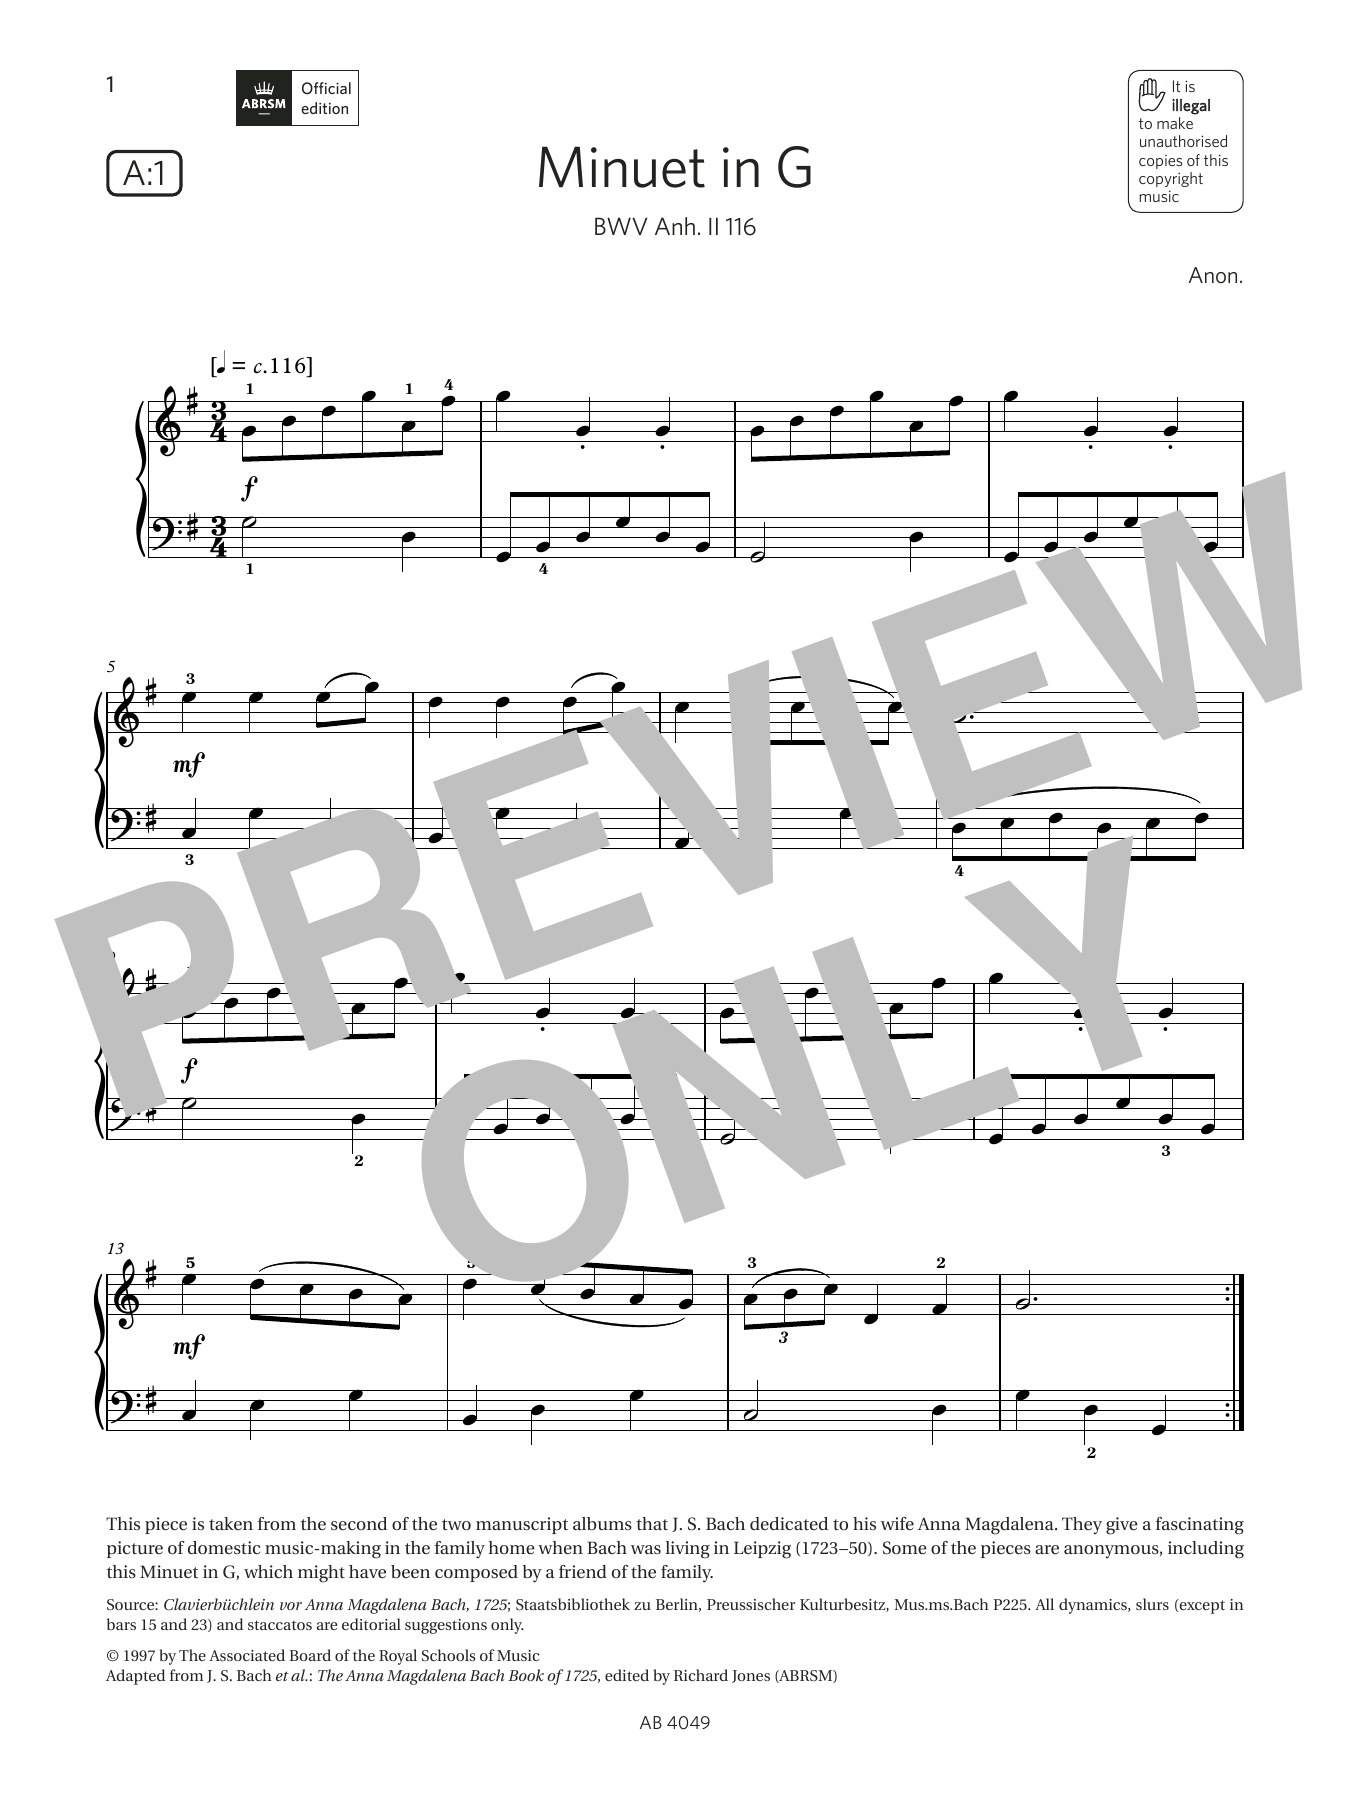 Download Anon Minuet in G (Grade 3, list A1, from the Sheet Music